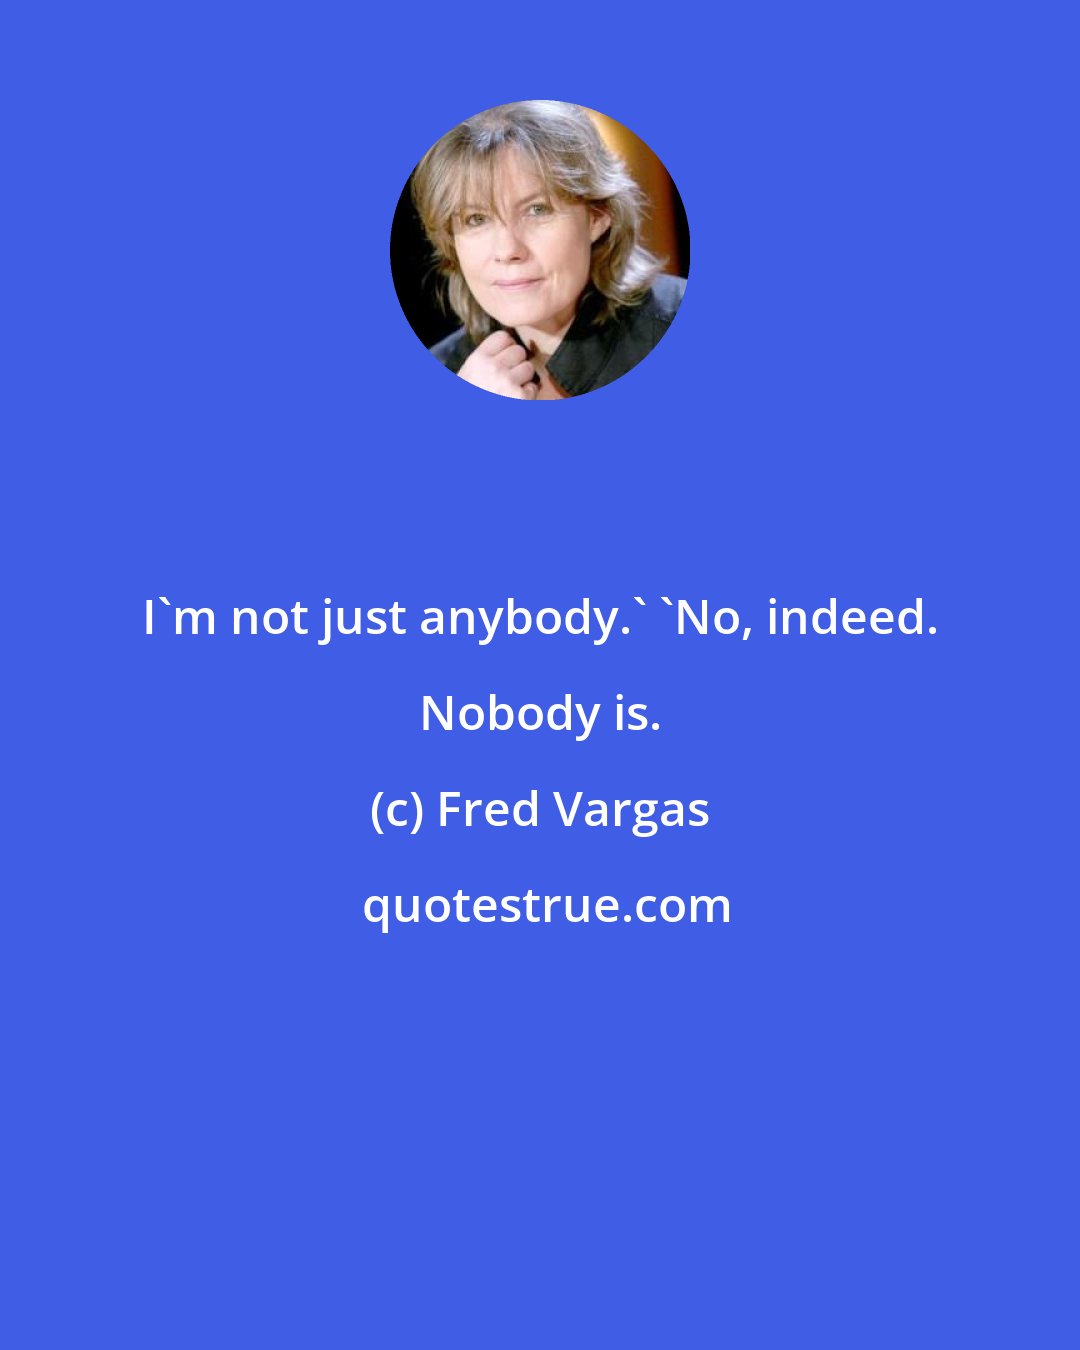 Fred Vargas: I'm not just anybody.' 'No, indeed. Nobody is.